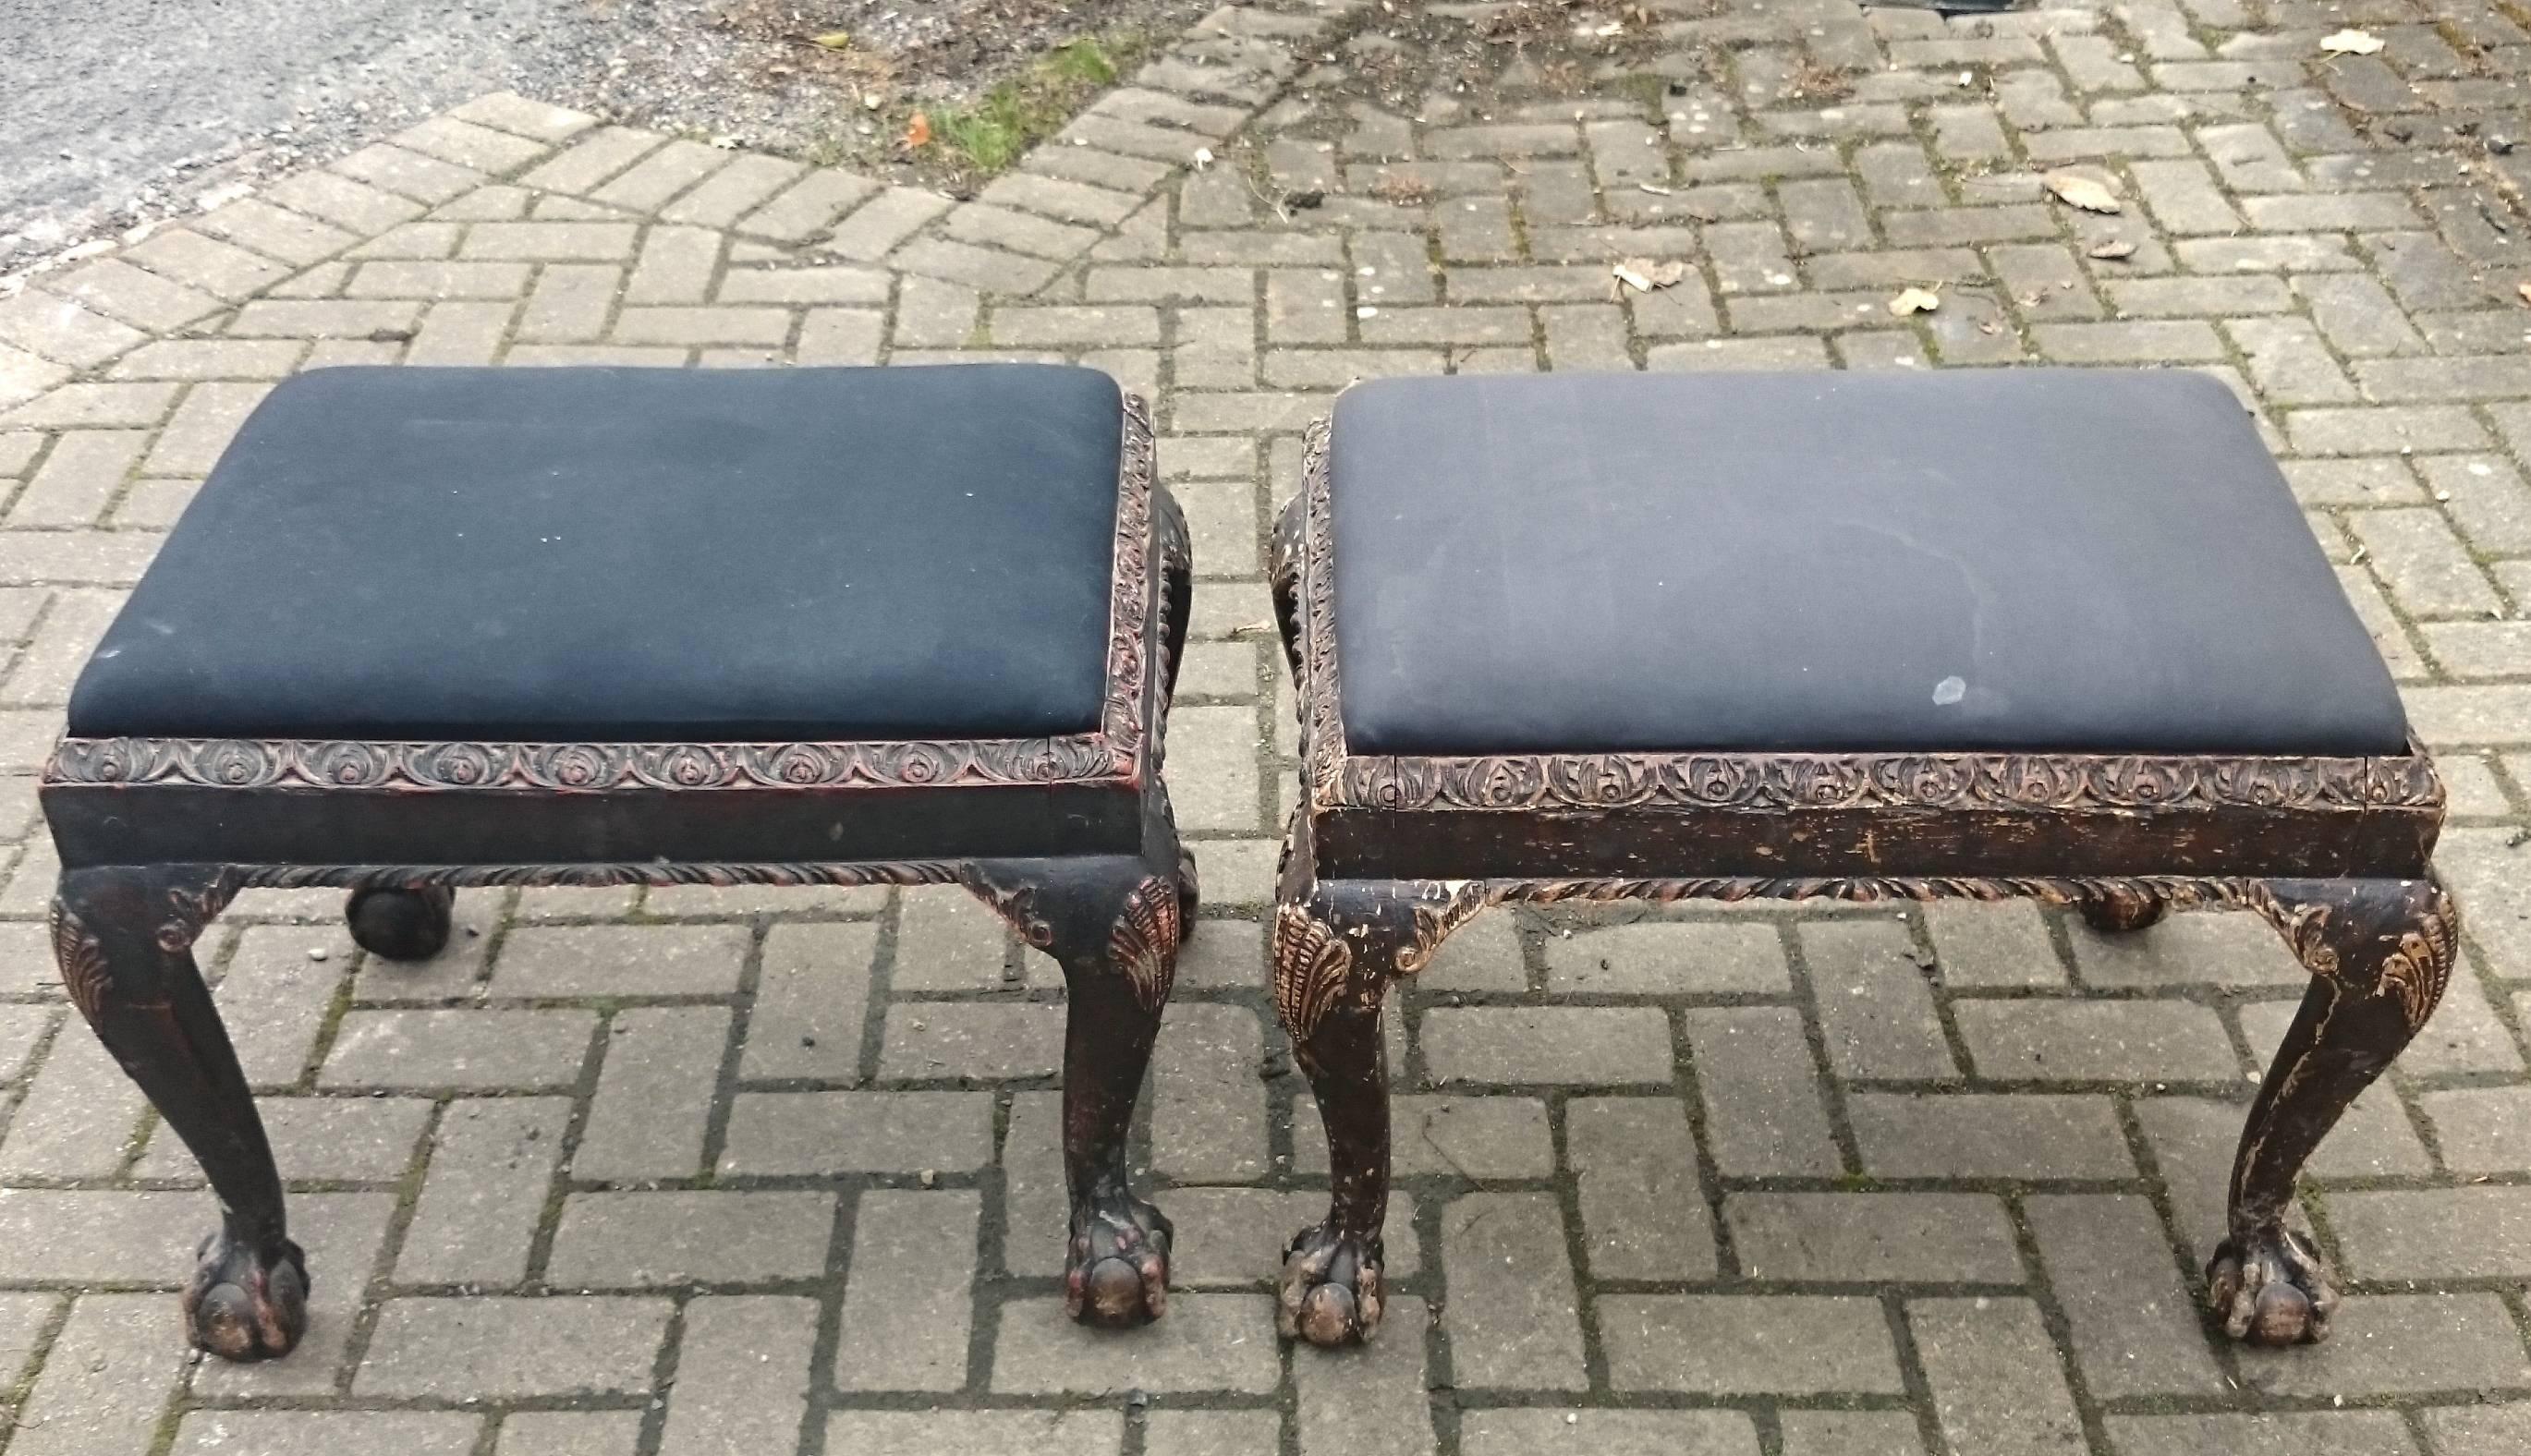 Pair of four legged jointed wooden antique stools with cabriole legs and carved decoration. This pair of stools has faded and worn paint and what is sometimes described as shabby chic. Regardless of the description, these two stools have a charm